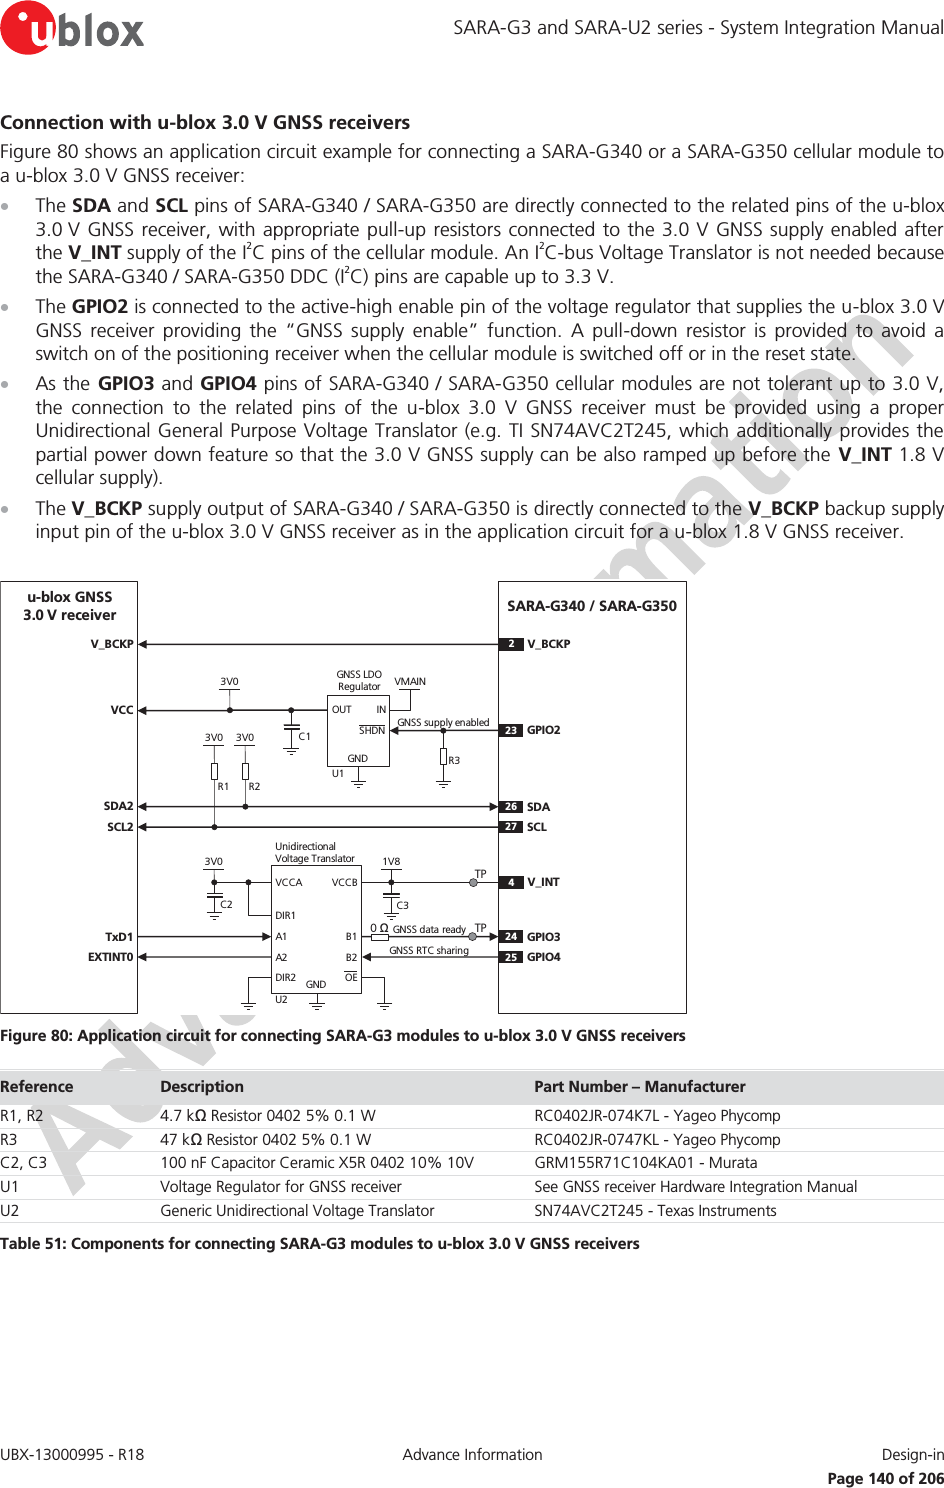 SARA-G3 and SARA-U2 series - System Integration Manual UBX-13000995 - R18  Advance Information  Design-in   Page 140 of 206 Connection with u-blox 3.0 V GNSS receivers Figure 80 shows an application circuit example for connecting a SARA-G340 or a SARA-G350 cellular module to a u-blox 3.0 V GNSS receiver: x The SDA and SCL pins of SARA-G340 / SARA-G350 are directly connected to the related pins of the u-blox 3.0 V GNSS receiver, with appropriate pull-up resistors connected to the 3.0 V GNSS supply enabled after the V_INT supply of the I2C pins of the cellular module. An I2C-bus Voltage Translator is not needed because the SARA-G340 / SARA-G350 DDC (I2C) pins are capable up to 3.3 V. x The GPIO2 is connected to the active-high enable pin of the voltage regulator that supplies the u-blox 3.0 V GNSS receiver providing the “GNSS supply enable” function. A pull-down resistor is provided to avoid a switch on of the positioning receiver when the cellular module is switched off or in the reset state. x As the GPIO3 and GPIO4 pins of SARA-G340 / SARA-G350 cellular modules are not tolerant up to 3.0 V, the connection to the related pins of the u-blox 3.0 V GNSS receiver must be provided using a proper Unidirectional General Purpose Voltage Translator (e.g. TI SN74AVC2T245, which additionally provides the partial power down feature so that the 3.0 V GNSS supply can be also ramped up before the V_INT 1.8 V cellular supply). x The V_BCKP supply output of SARA-G340 / SARA-G350 is directly connected to the V_BCKP backup supply input pin of the u-blox 3.0 V GNSS receiver as in the application circuit for a u-blox 1.8 V GNSS receiver.  SARA-G340 / SARA-G350R1INOUTGNDGNSS LDORegulatorSHDNu-blox GNSS3.0 V receiverSDA2SCL2R23V0 3V0VMAIN3V0U123GPIO2SDASCLC12627VCCR3V_BCKP V_BCKP224GPIO325GPIO41V8B1 A1GNDU2B2A2VCCBVCCAUnidirectionalVoltage TranslatorC2 C33V0TxD1EXTINT04V_INTDIR1DIR2 OEGNSS data readyGNSS RTC sharingTPGNSS supply enabled0 ΩTP Figure 80: Application circuit for connecting SARA-G3 modules to u-blox 3.0 V GNSS receivers Reference  Description  Part Number – Manufacturer R1, R2 4.7 kΩ Resistor 0402 5% 0.1 W  RC0402JR-074K7L - Yageo Phycomp R3 47 kΩ Resistor 0402 5% 0.1 W  RC0402JR-0747KL - Yageo Phycomp C2, C3 100 nF Capacitor Ceramic X5R 0402 10% 10V GRM155R71C104KA01 - Murata U1 Voltage Regulator for GNSS receiver See GNSS receiver Hardware Integration Manual U2 Generic Unidirectional Voltage Translator SN74AVC2T245 - Texas Instruments Table 51: Components for connecting SARA-G3 modules to u-blox 3.0 V GNSS receivers  